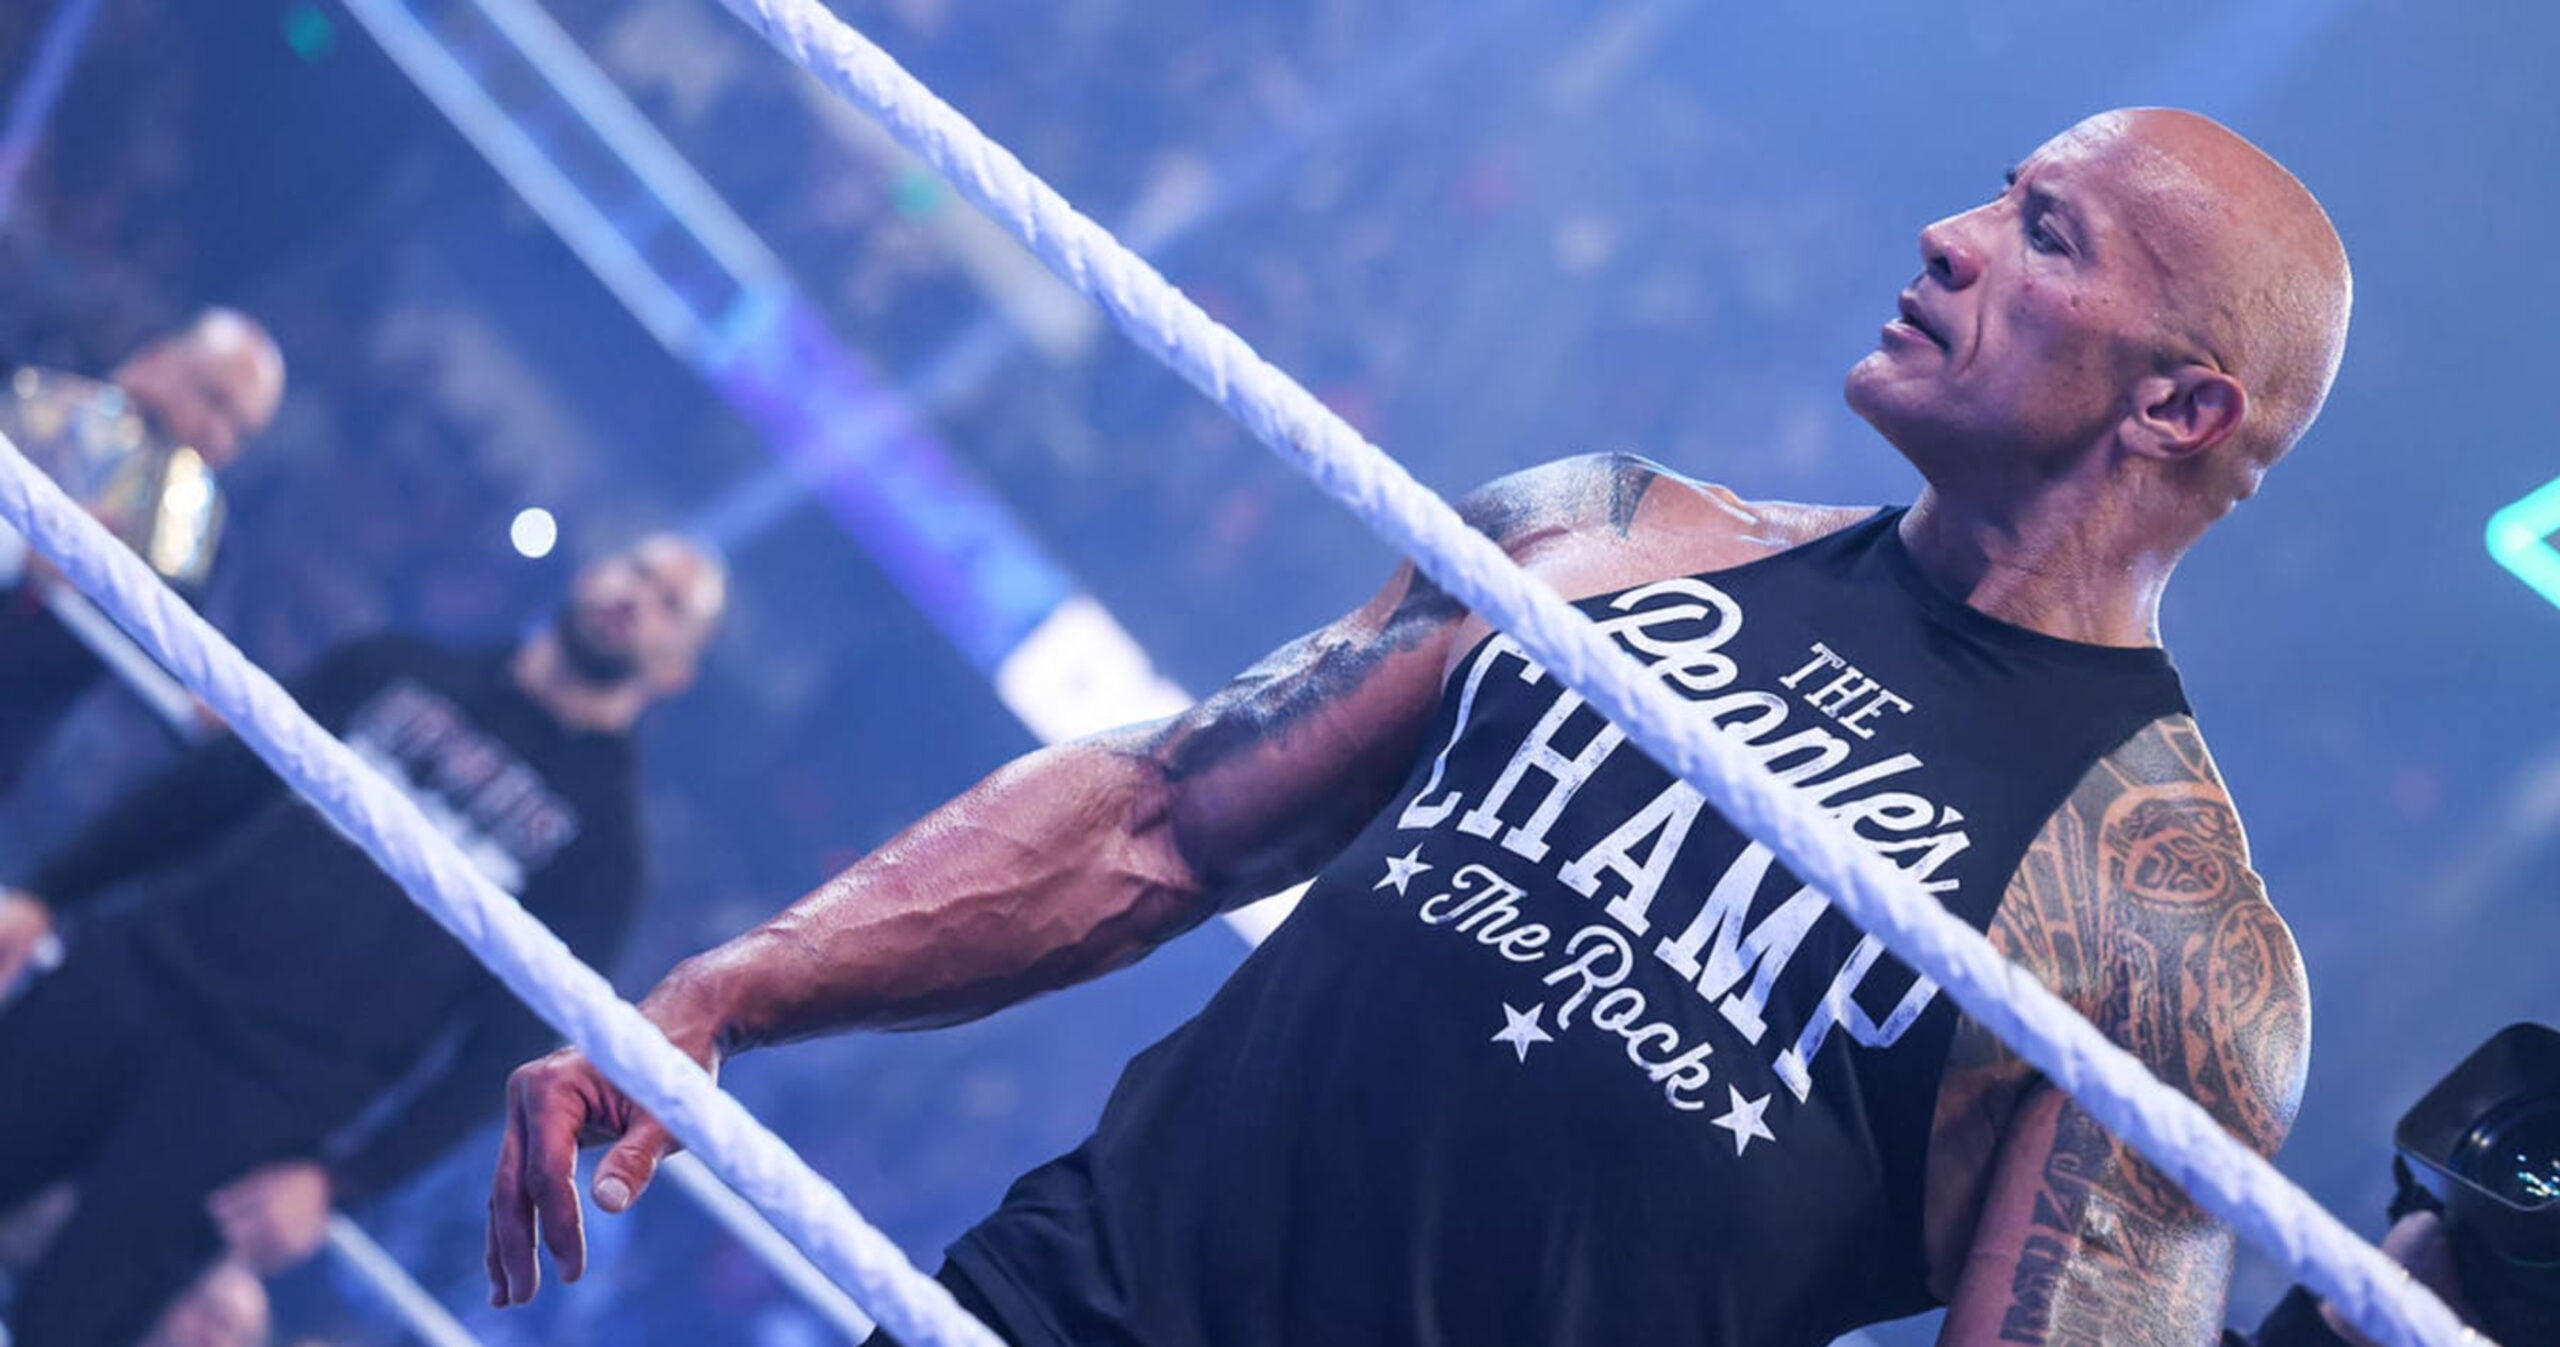 The Rock vs. Roman Reigns Might Be The Best Move for WWE in the Short and Long-Term